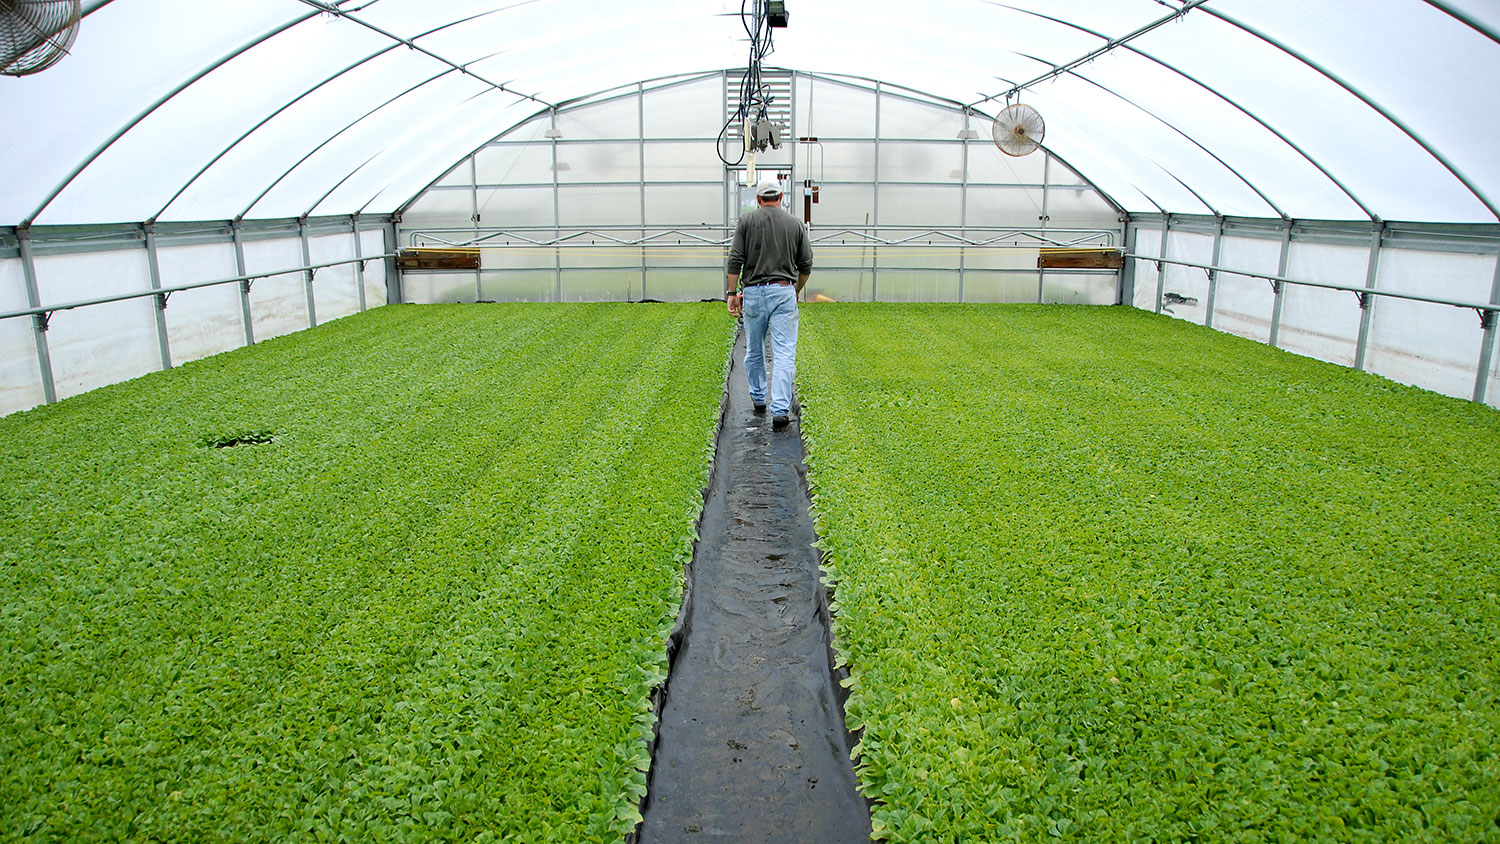 Extension agent looks over tobacco plants in a hyrdoponic greenhouse in Kinston. PHOTO BY ROGER WINSTEAD